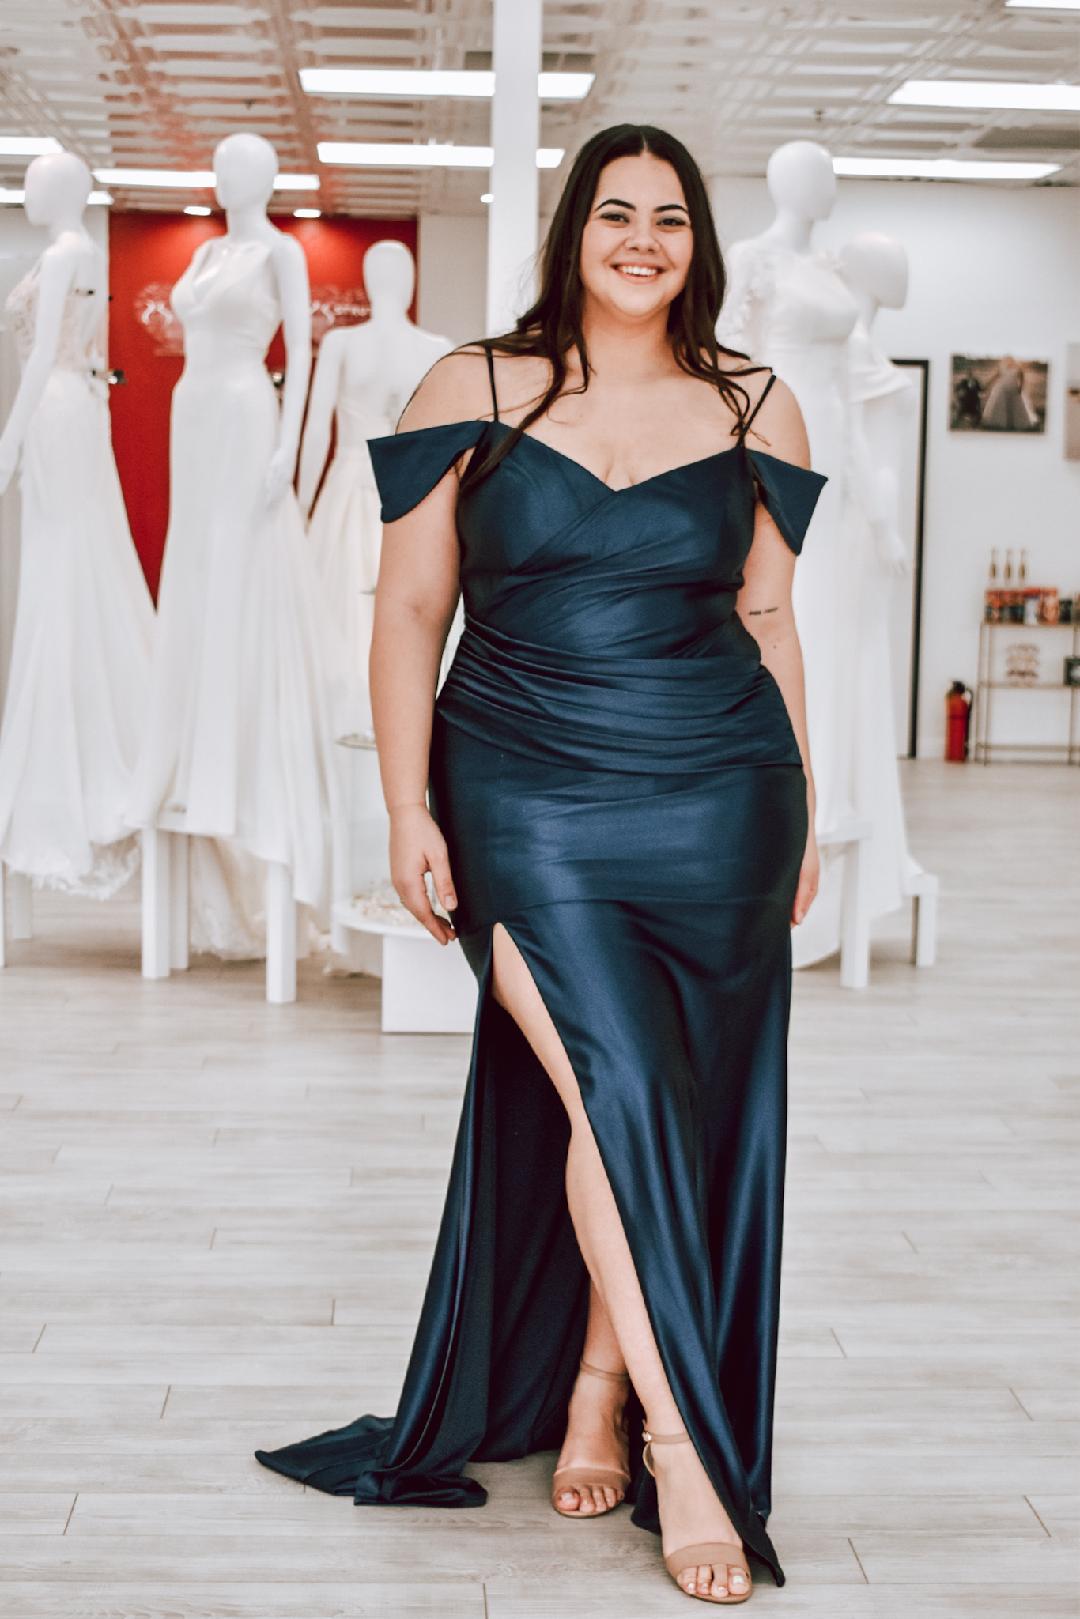 Shop for the Hottest Plus Size Prom Dresses – The Dress Outlet